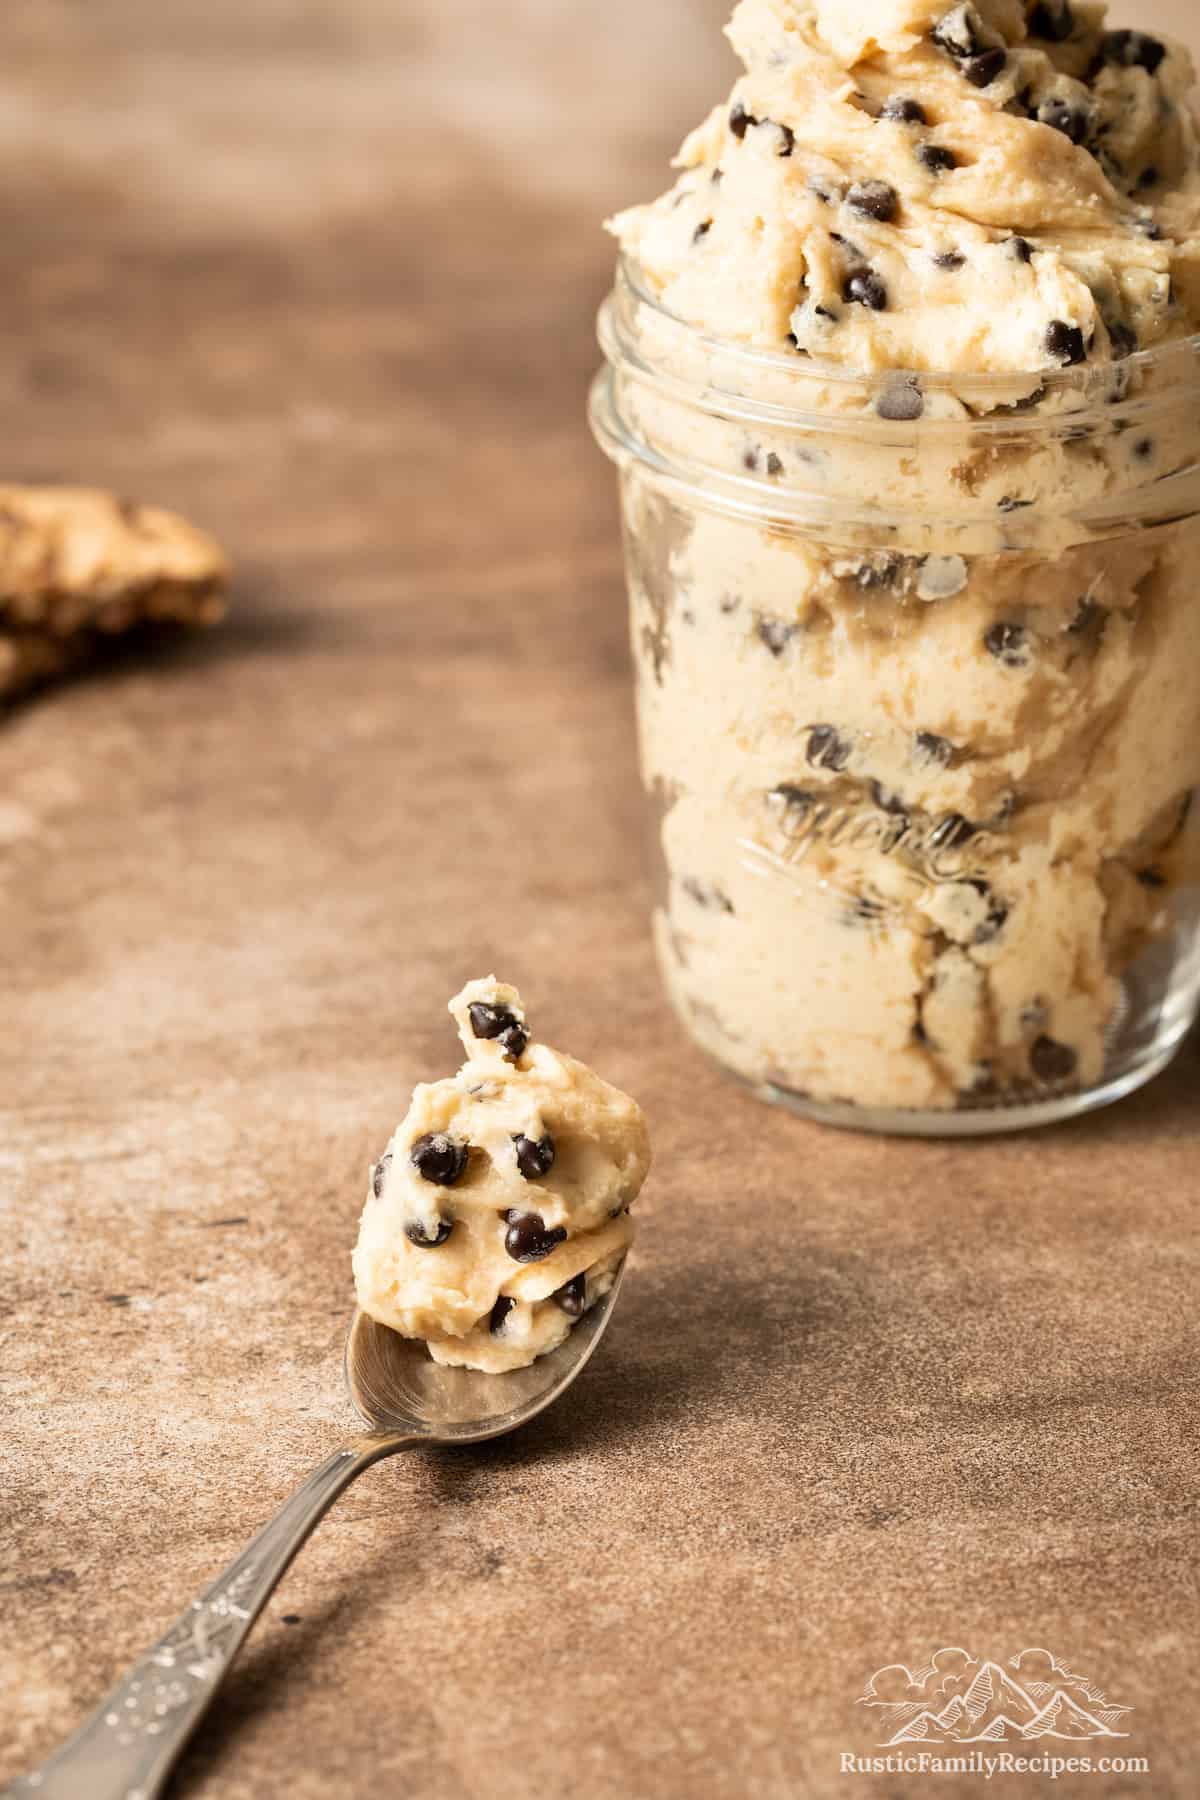 A mason jar with edible chocolate chip cookie dough and spoonful bedside it